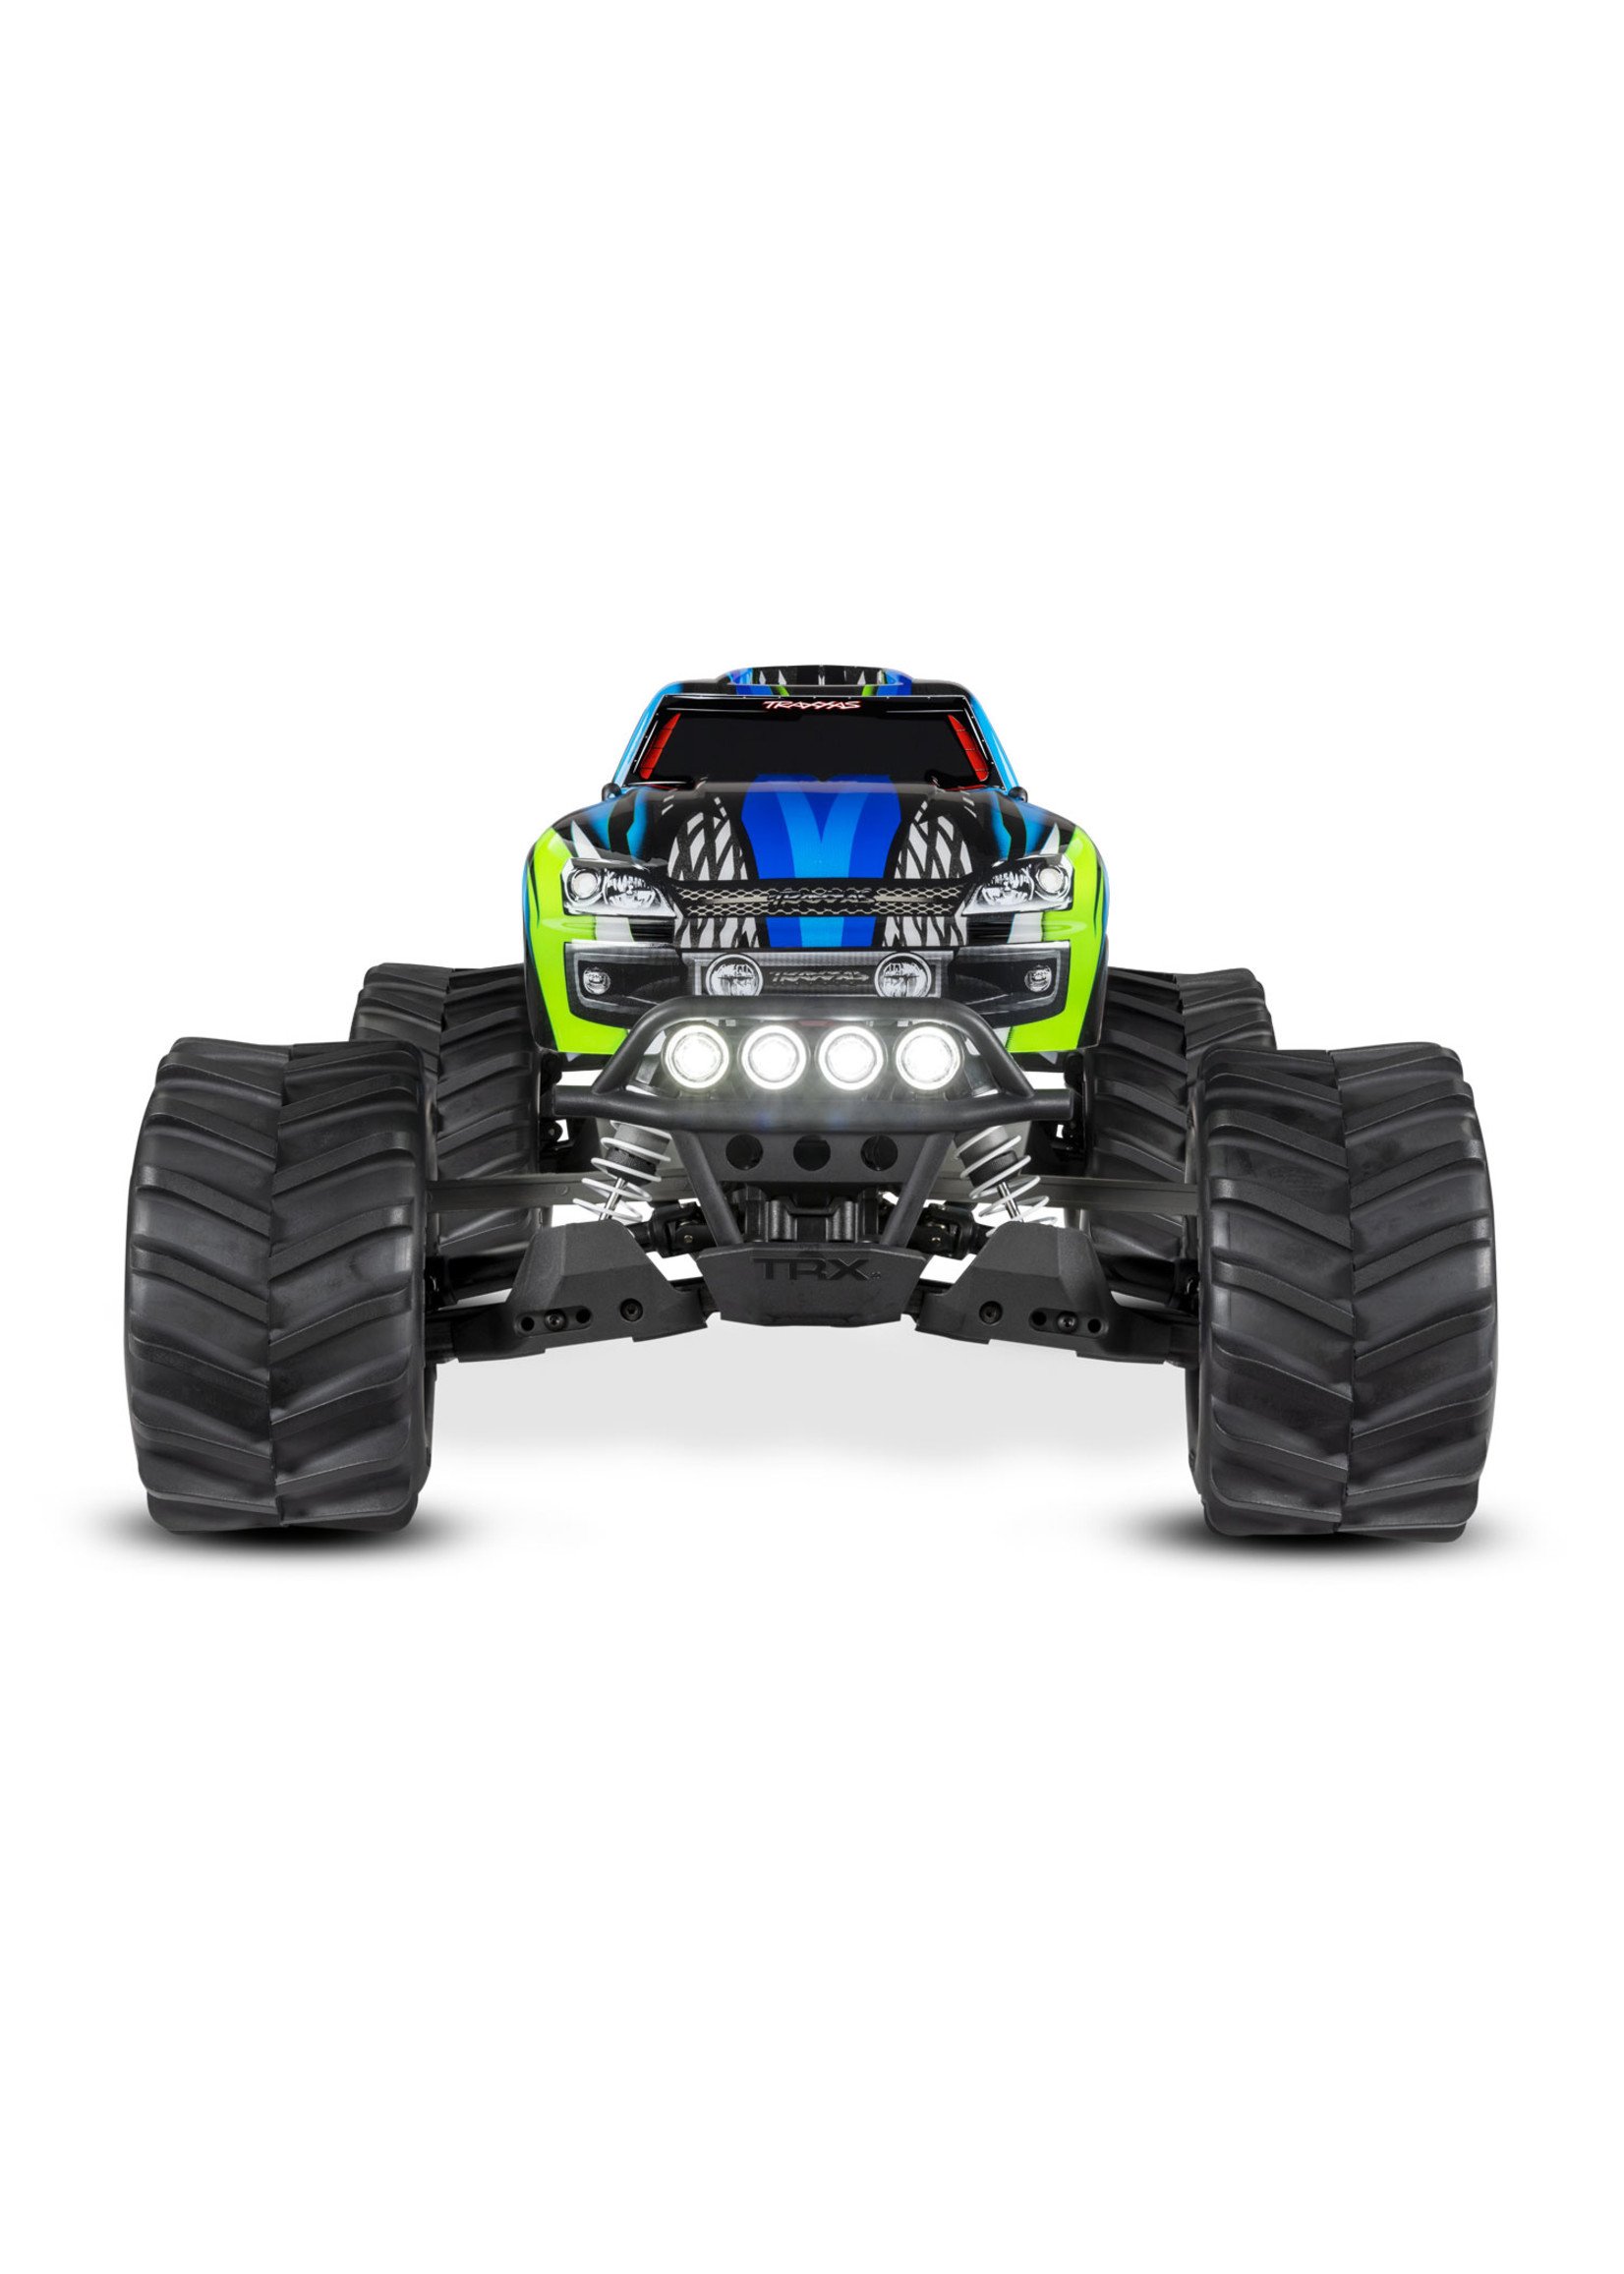 Traxxas 67054-61BLU - Stampede 4X4 With LED Lights - Blue/Green